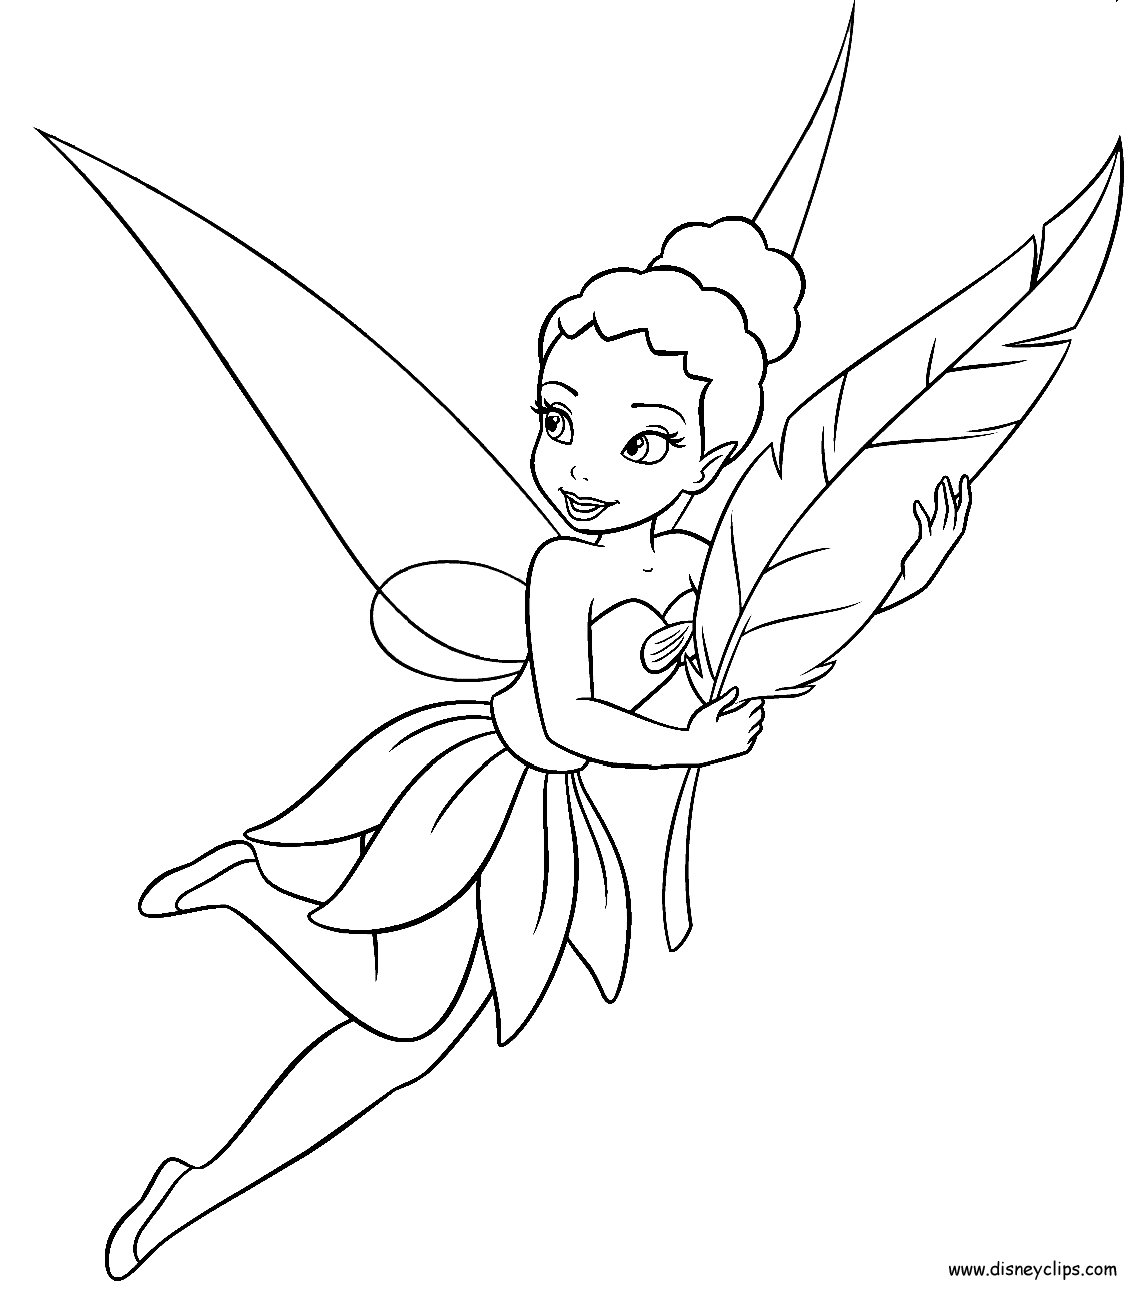 tinkerbell fairy coloring pages 30 tinkerbell coloring pages free coloring pages free tinkerbell fairy coloring pages 